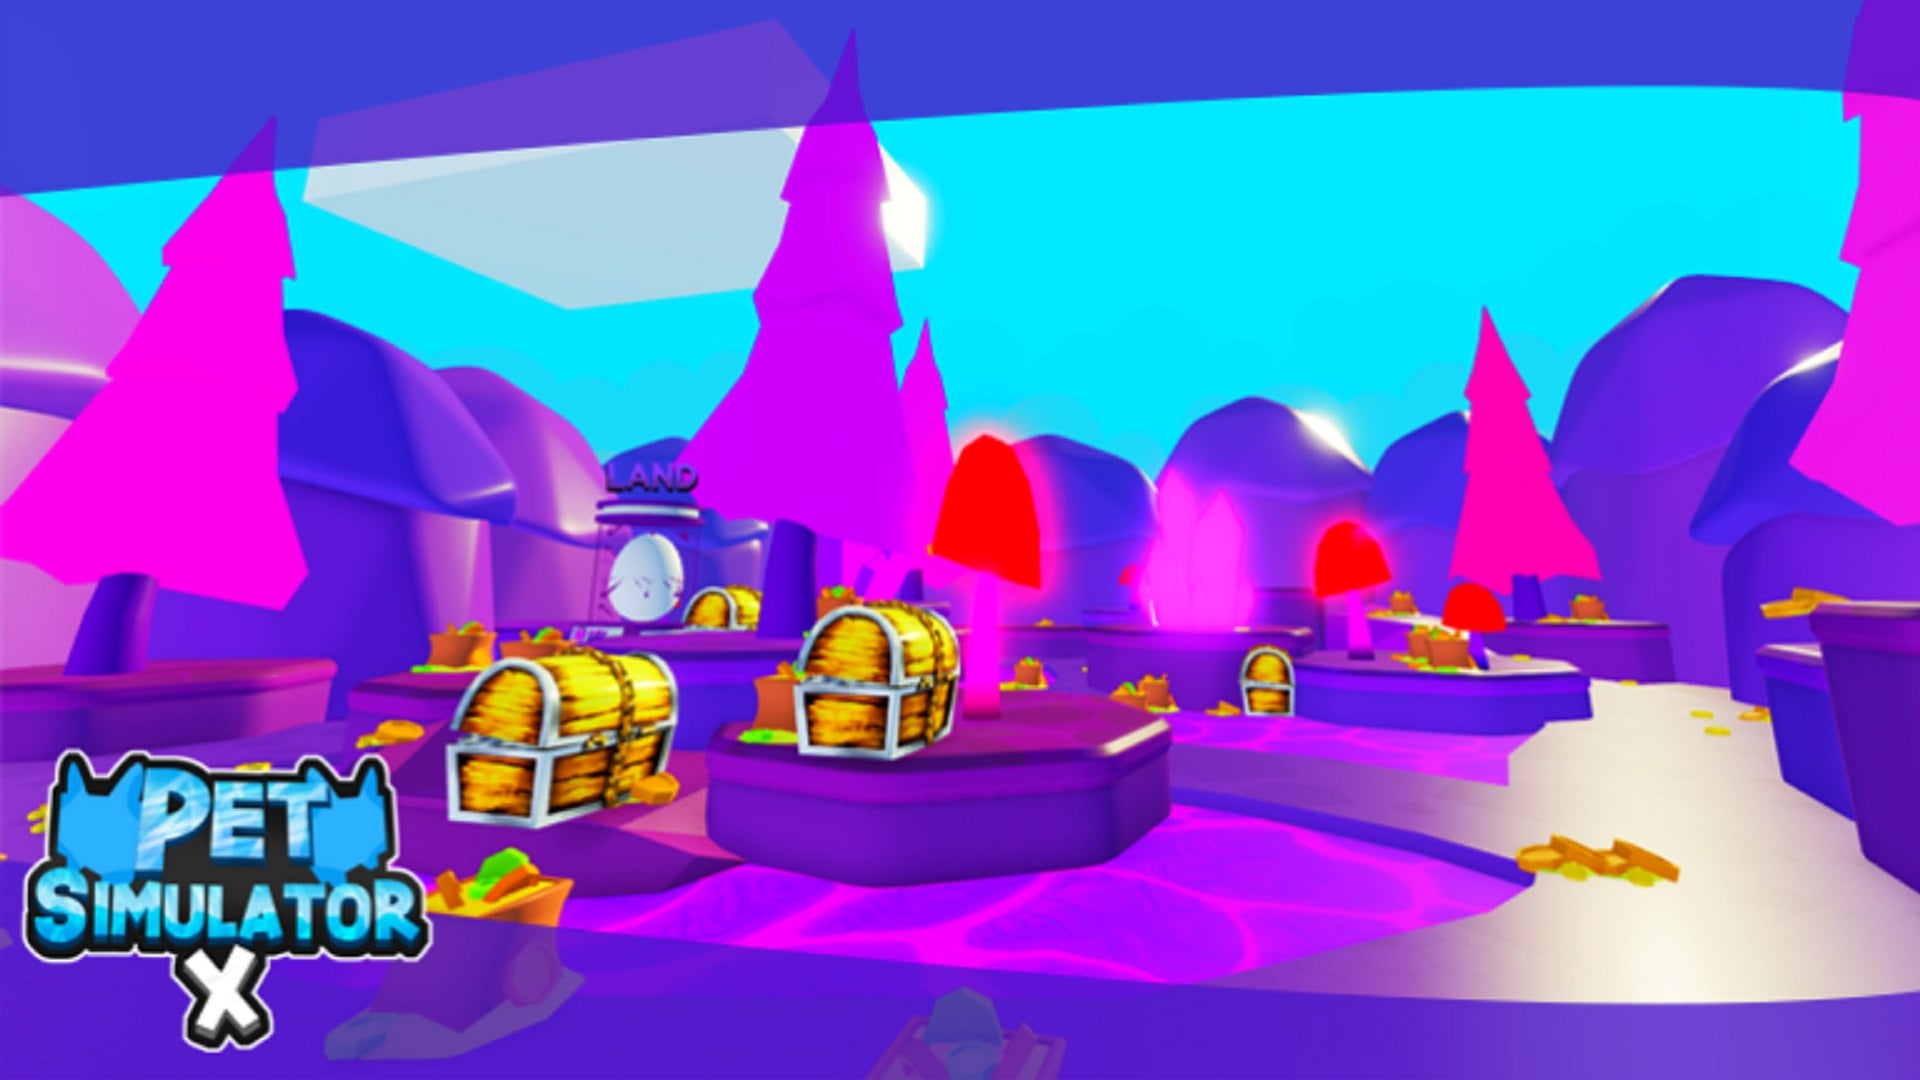 One of the on-platform banners for Roblox's Pet Simulator X experience. It shows several of the game's treasure chests in a distinctive purple biome area.